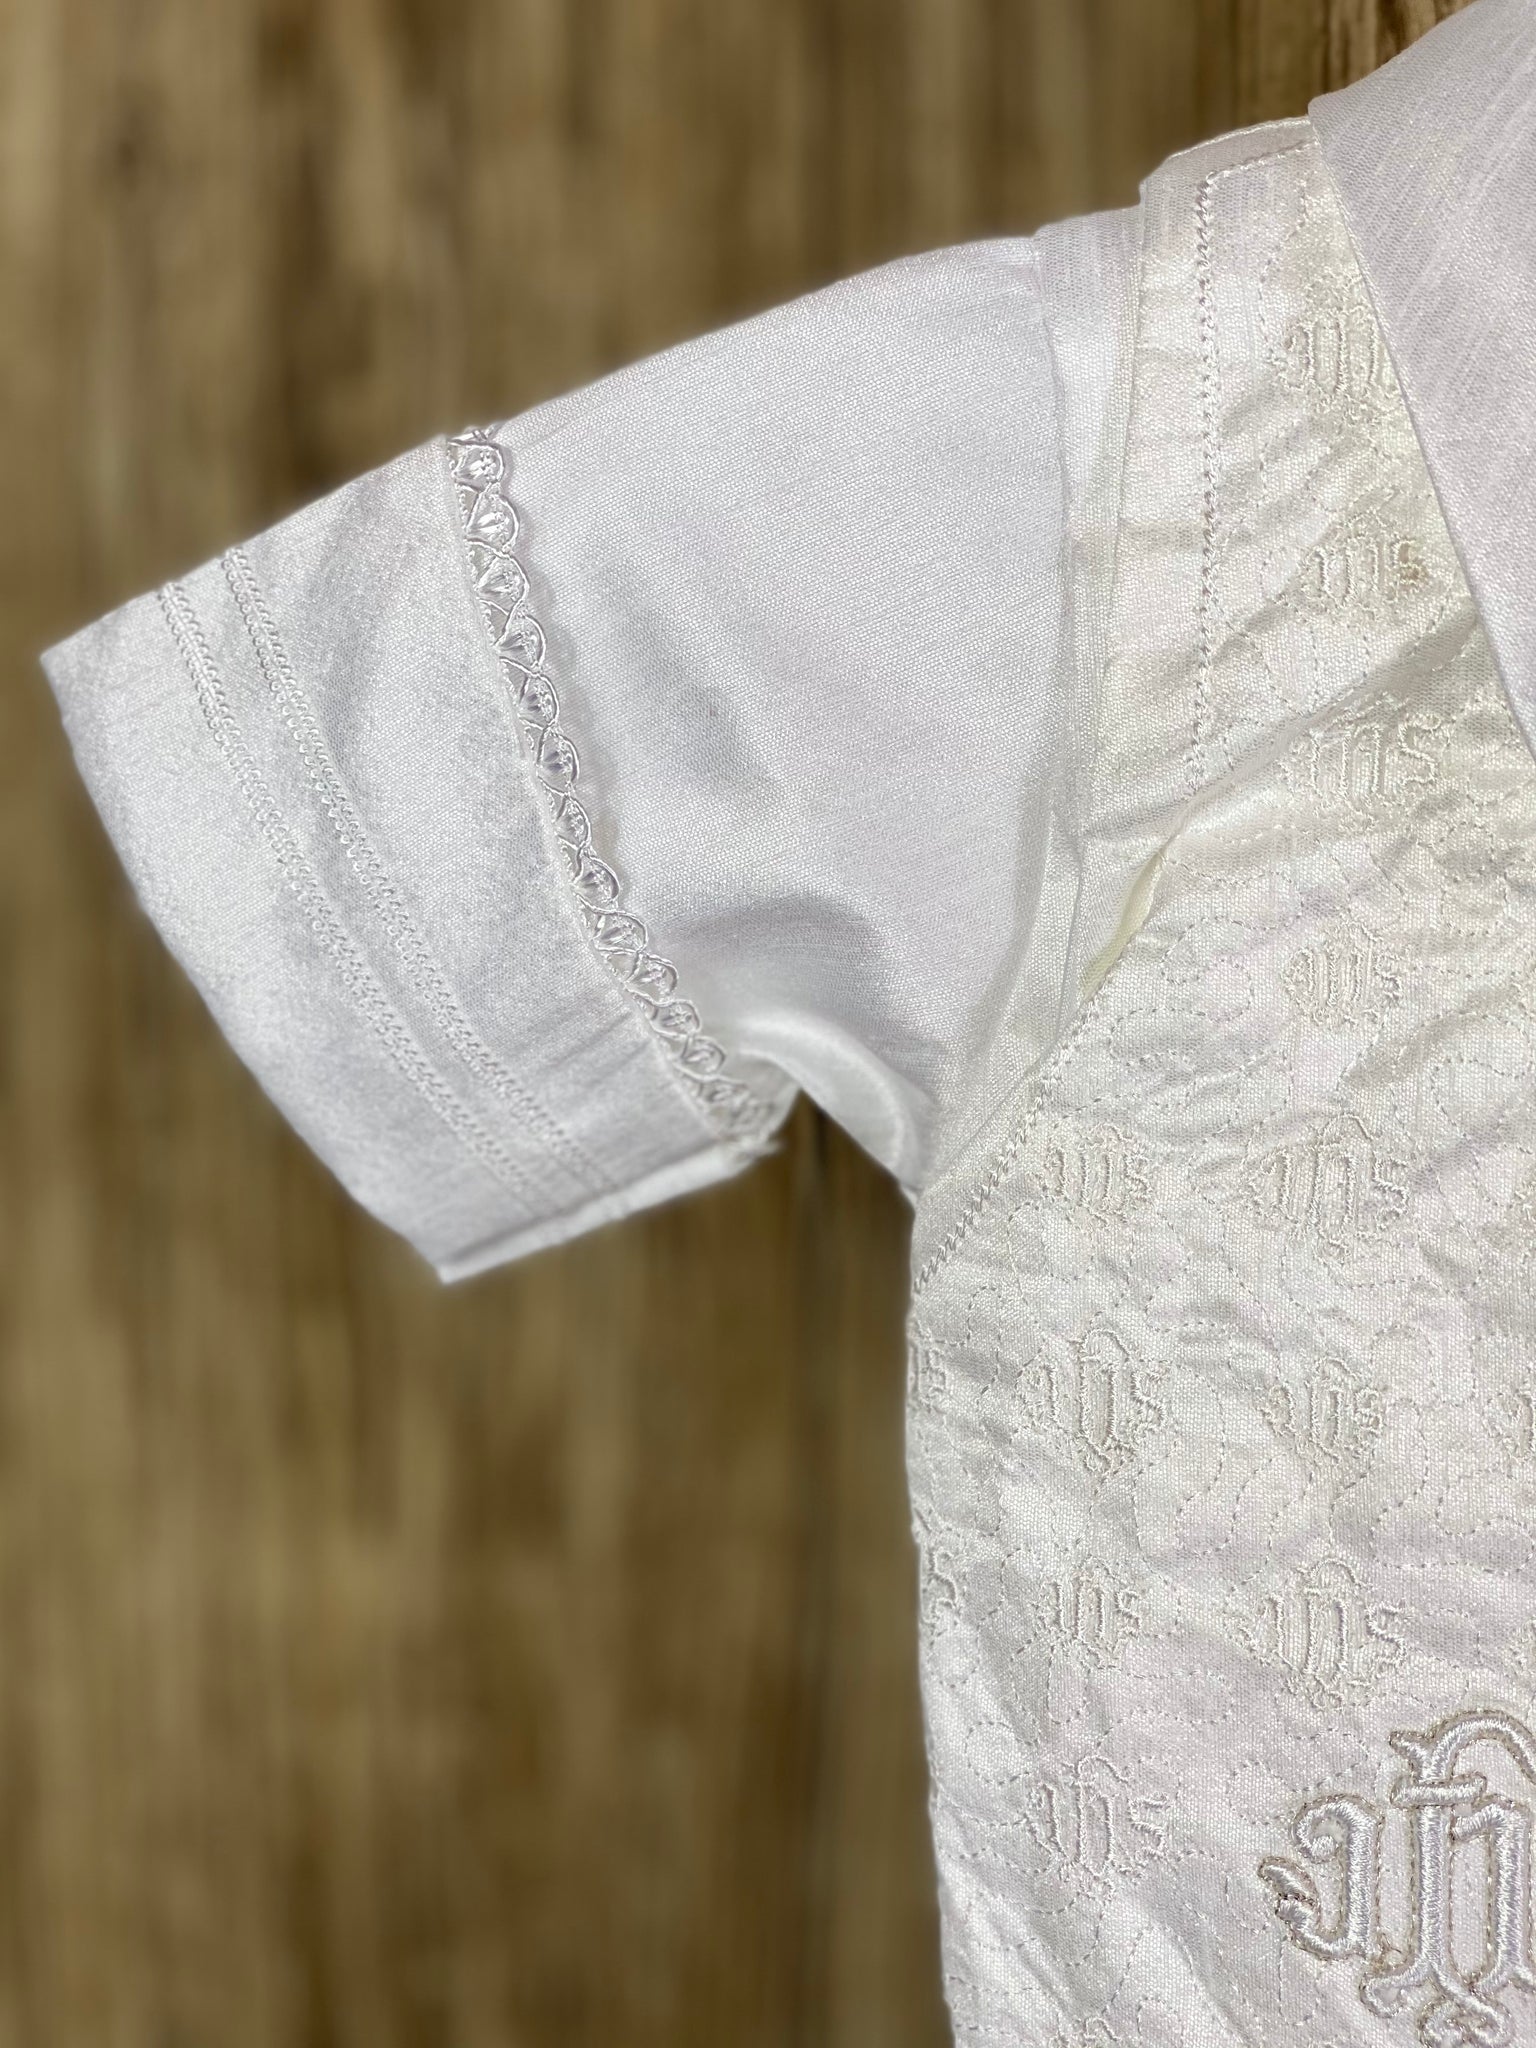 This a beautiful, one-of-a-kind boy’s baptism gown/set.  Lovely clothes for a precious child.   WHITE   4-piece white set including beret, vest, shirt, suspender pants JHS symbol embroidered into vest (JHS stands for Jesus Holmium Salvatore, Latin for Jesus Savior of Mankind) Tassel pin with 3 rhinestone centered circles Thin trim along cuffs, beret, and up pant legs Collared shirt with short sleeves Buttoning on pant cuffs Elastic banding behind pants Button closure on back of shirt